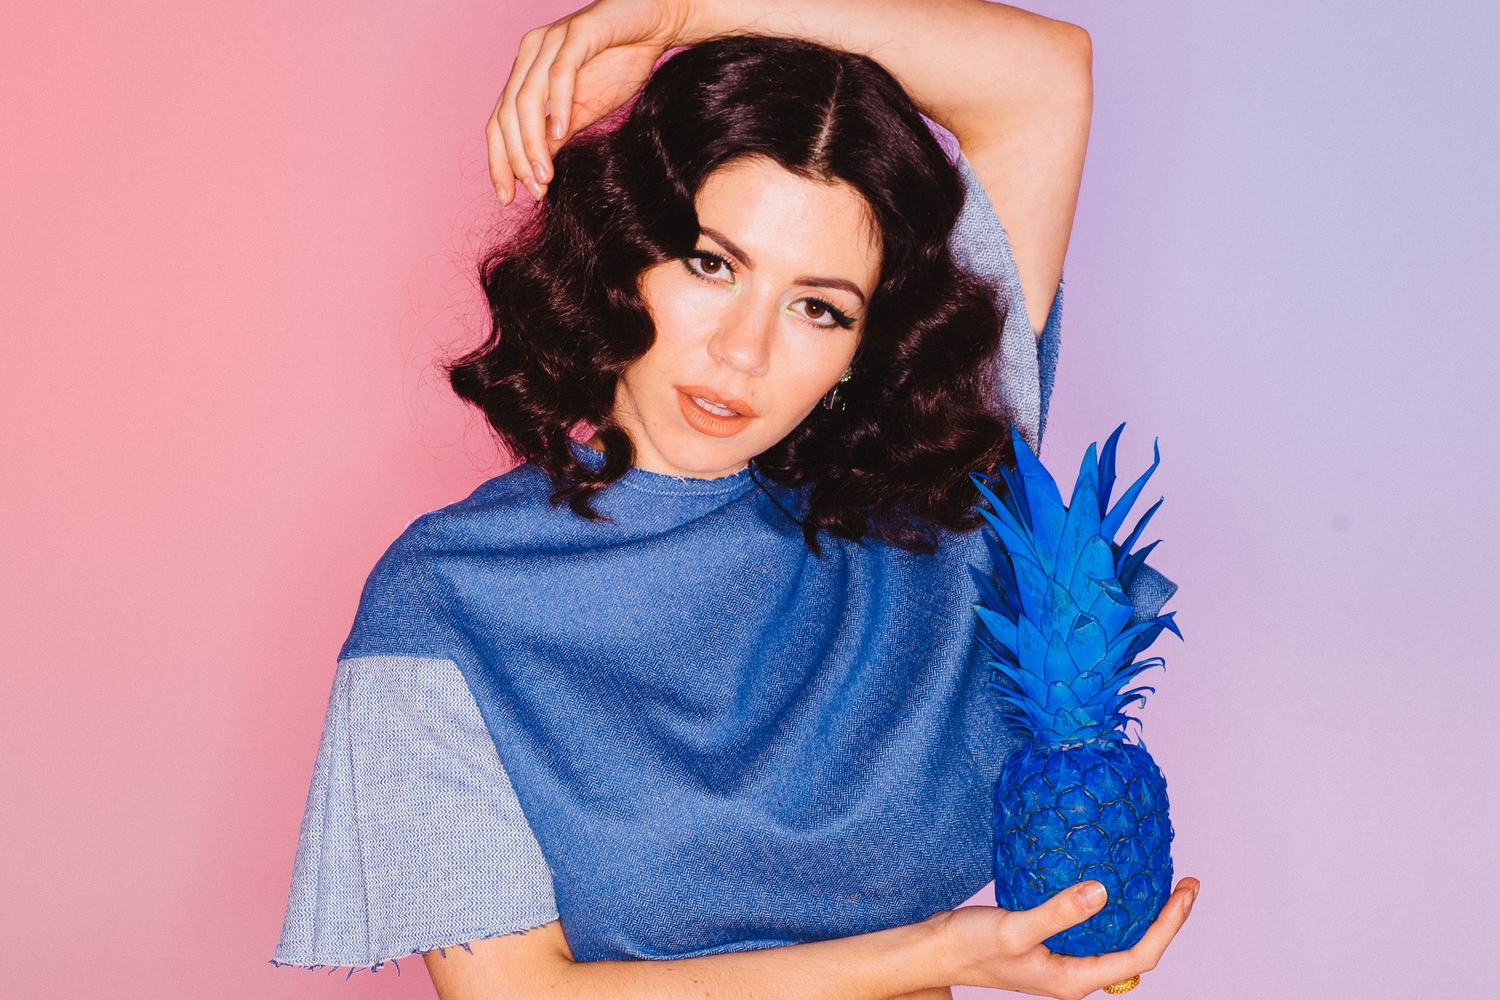 Marina and the Diamonds: DIY’s April 2015 cover star revealed